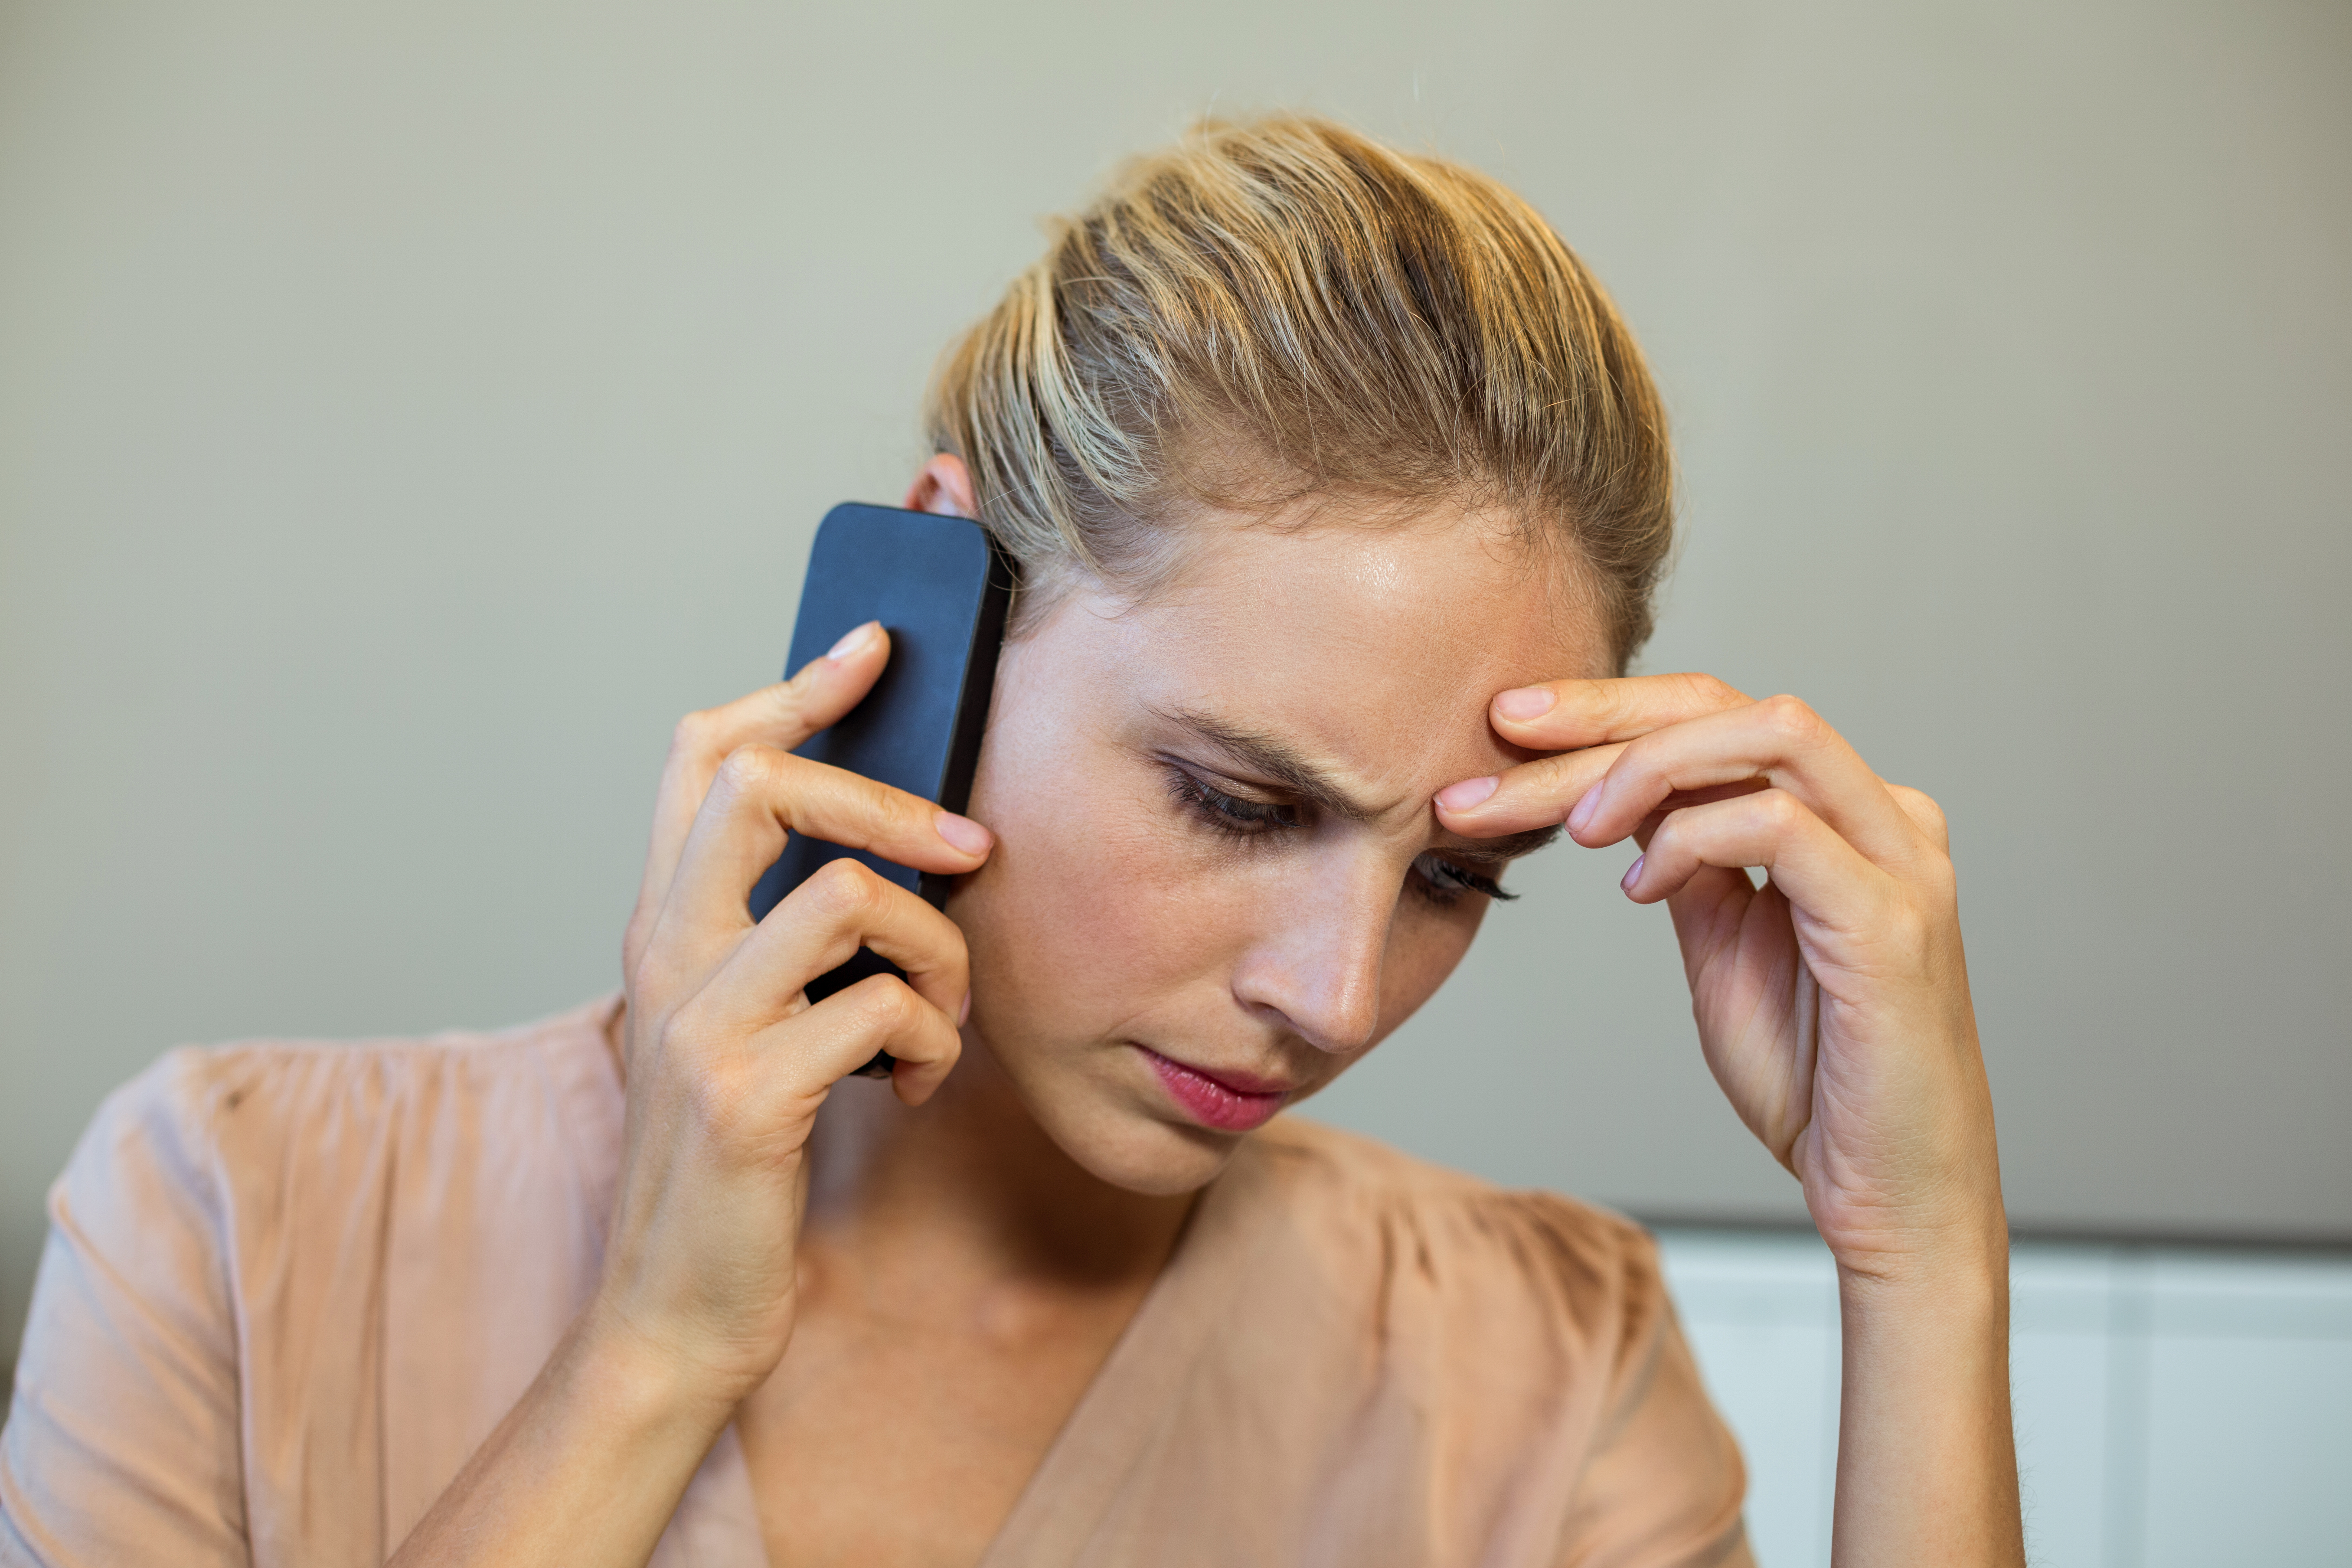 A woman looking frustrated while on the phone | Source: Shutterstock